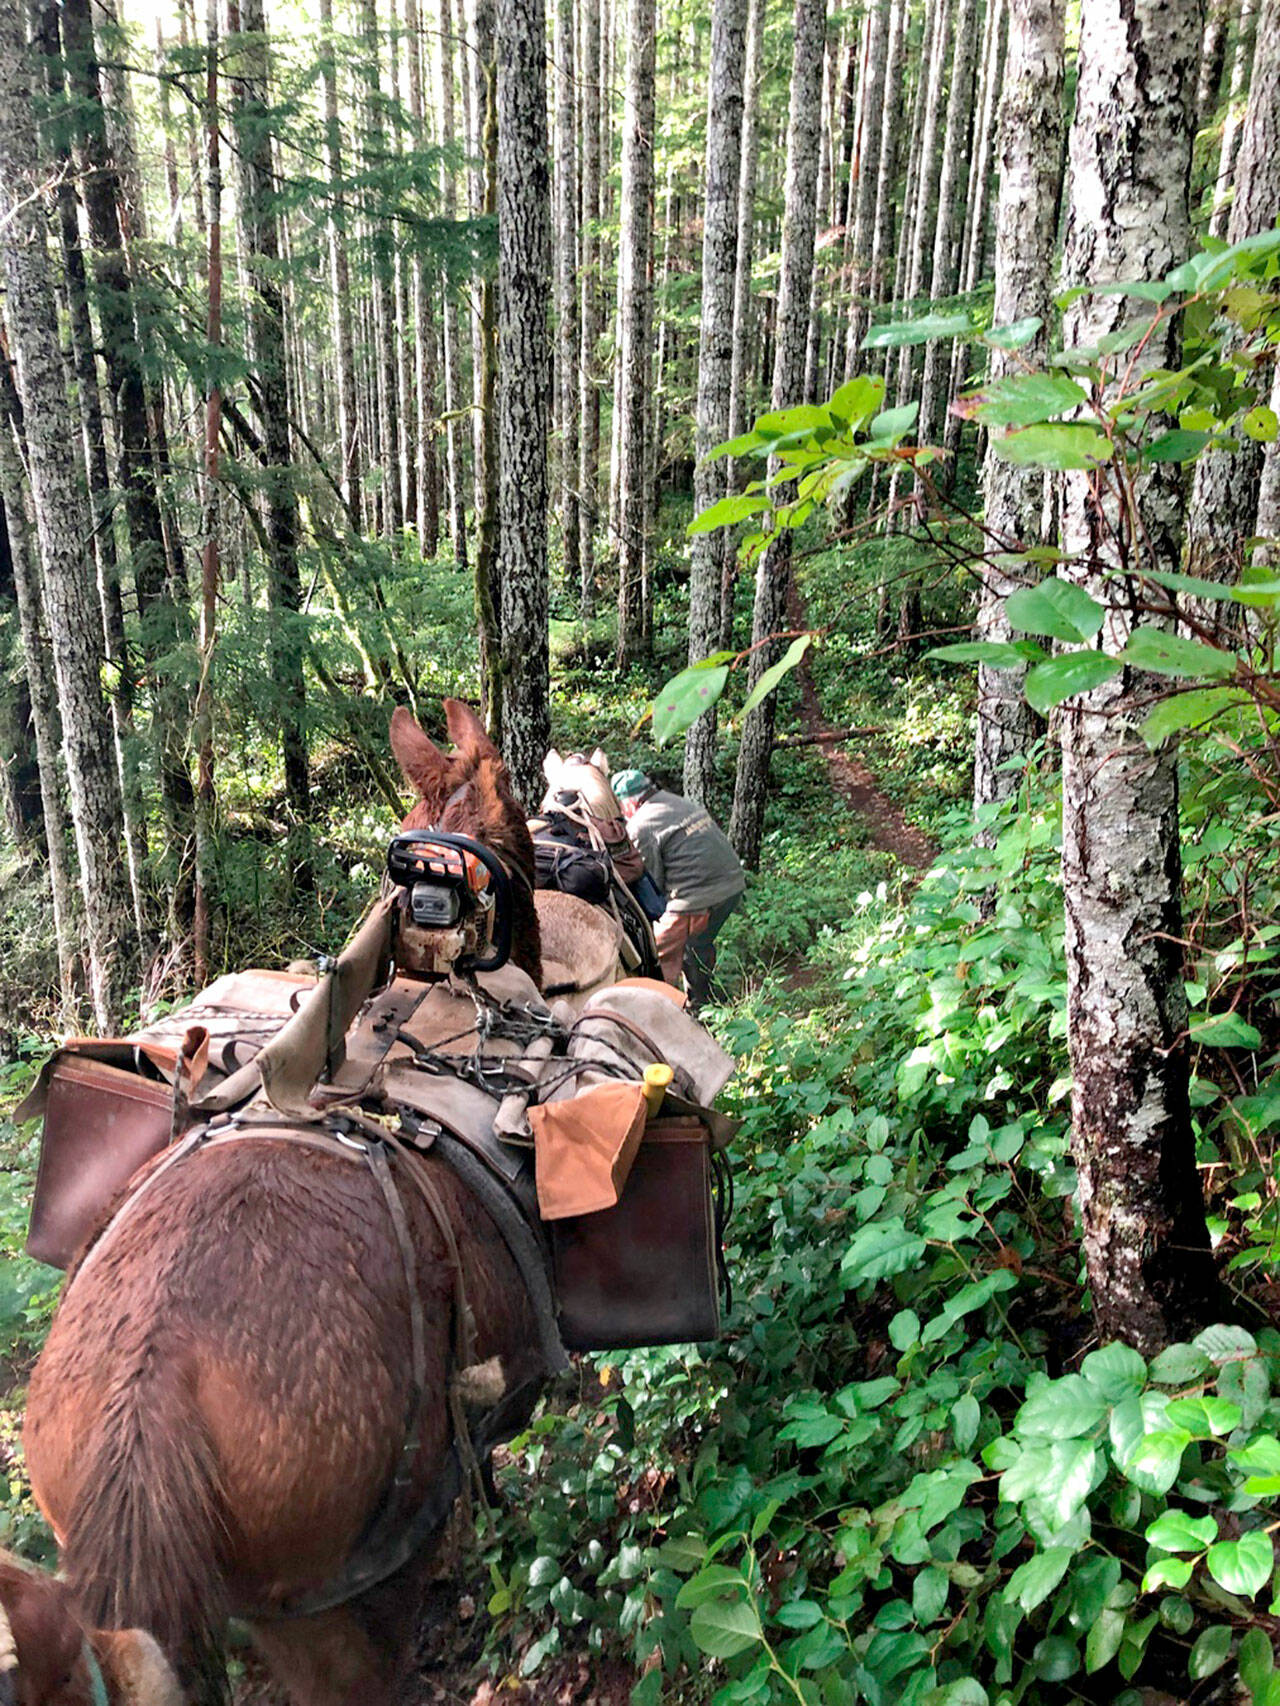 Larry Baysinger dismounts his horse Scout to clear fallen tree branches off a trail in Mt. Mueller. Davidson, his mules, is fitted with a pack saddle designed to carry his chainsaw on top, an axe (the yellow axe handle is seen sticking out of the pack box) and other tools, and even two small chairs he and his wife to sit on when taking a break. (Photo by Sherry Baysinger)